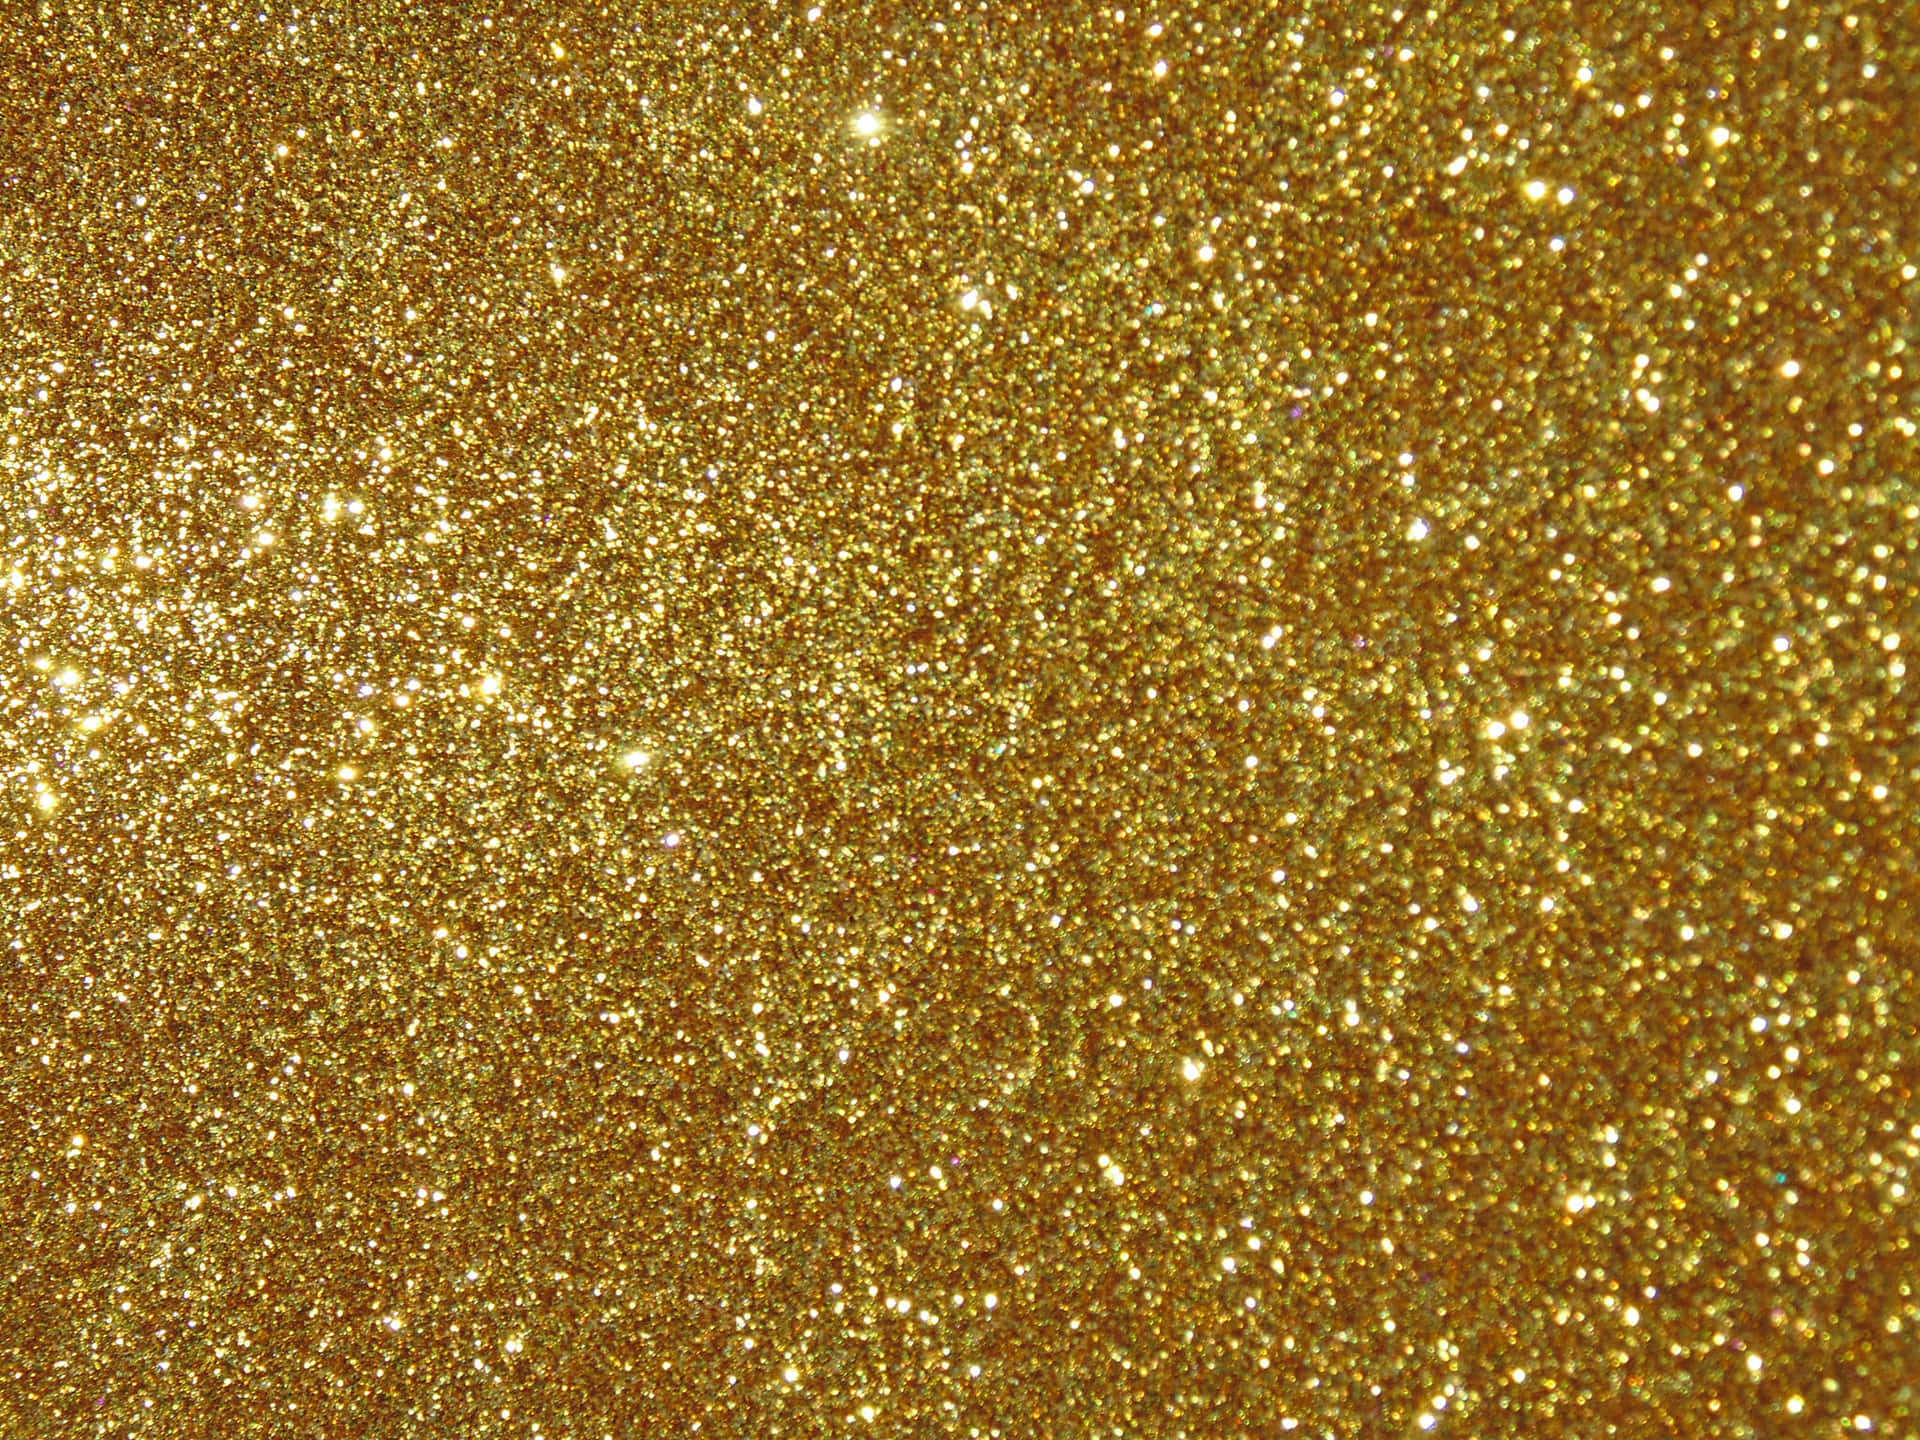 Metallic gold background with texture